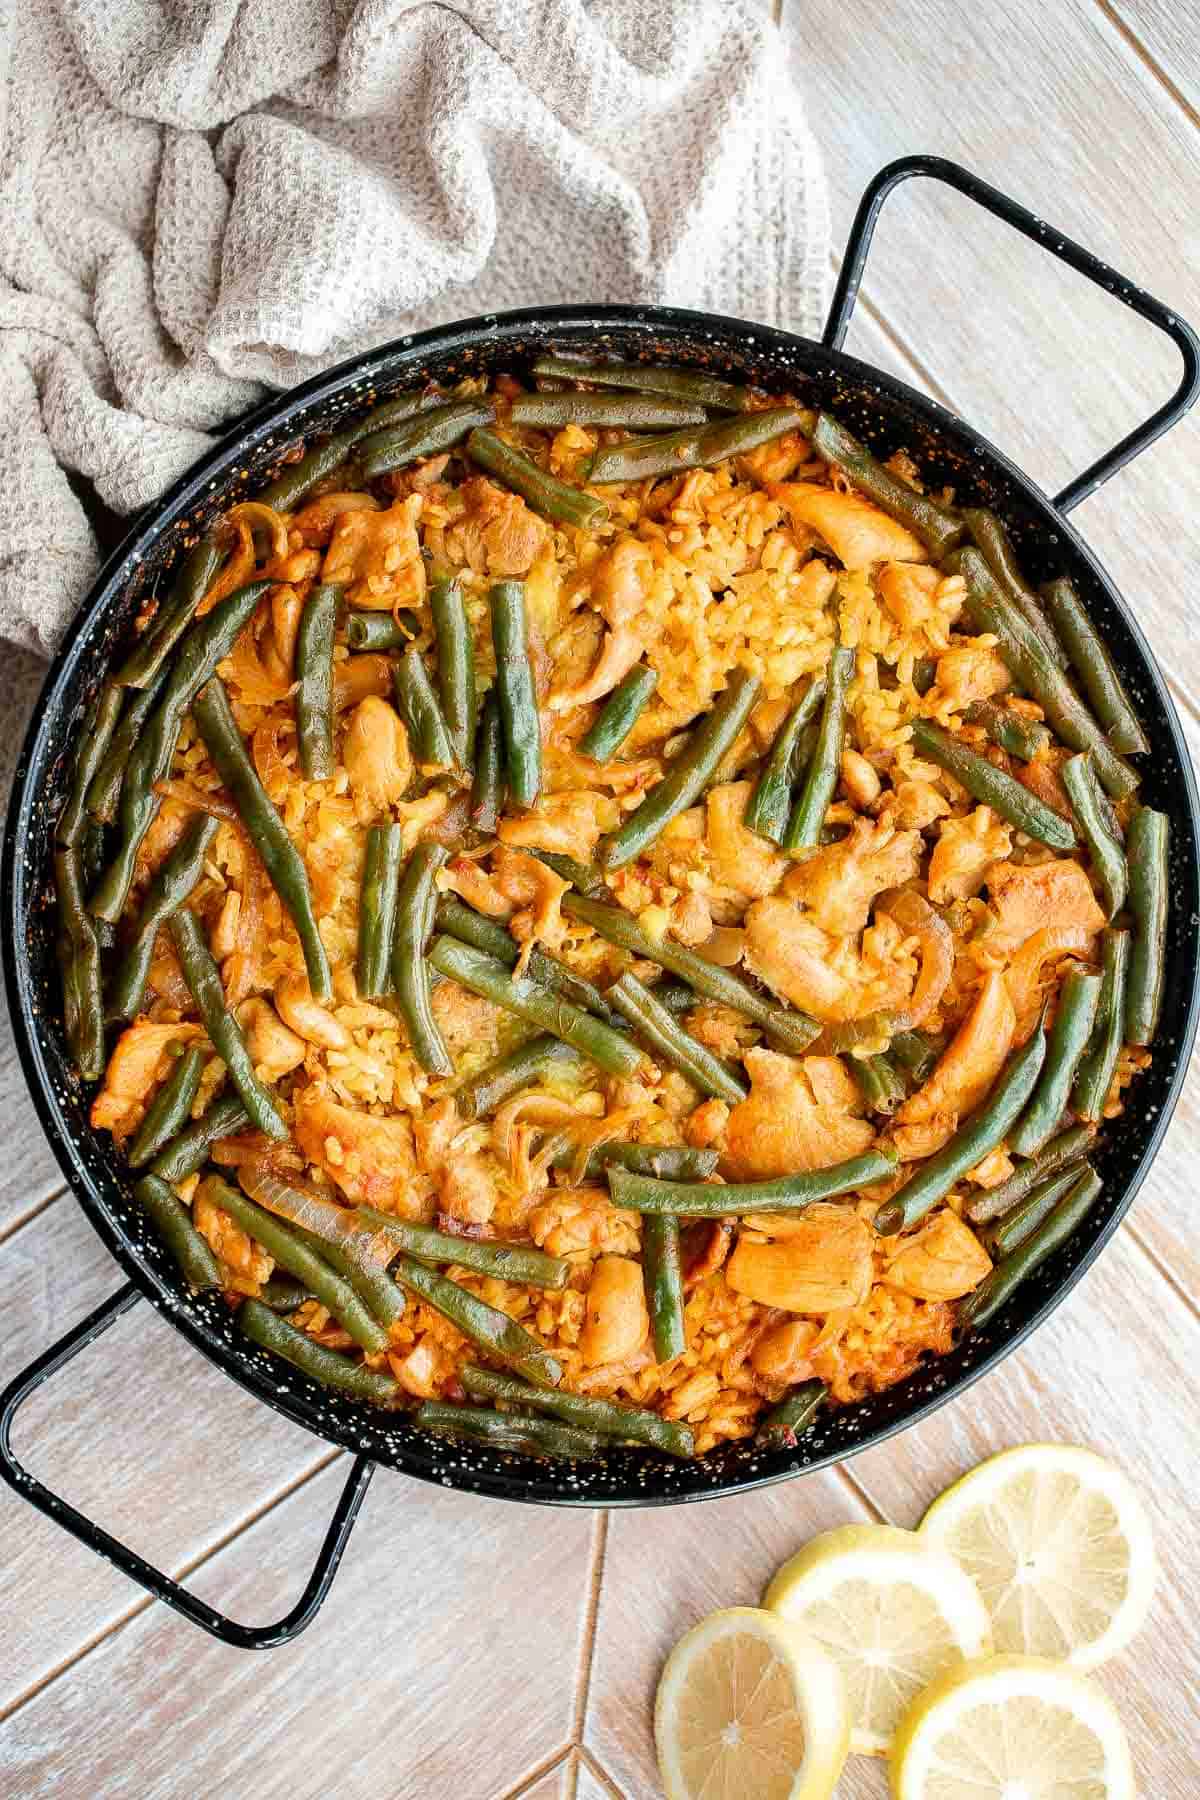 Authentic Chicken Paella (Paella Valenciana) is delicious and filling. It’s loaded with protein, veggies, and rice, cooked in a flavorful saffron broth. | aheadofthyme.com